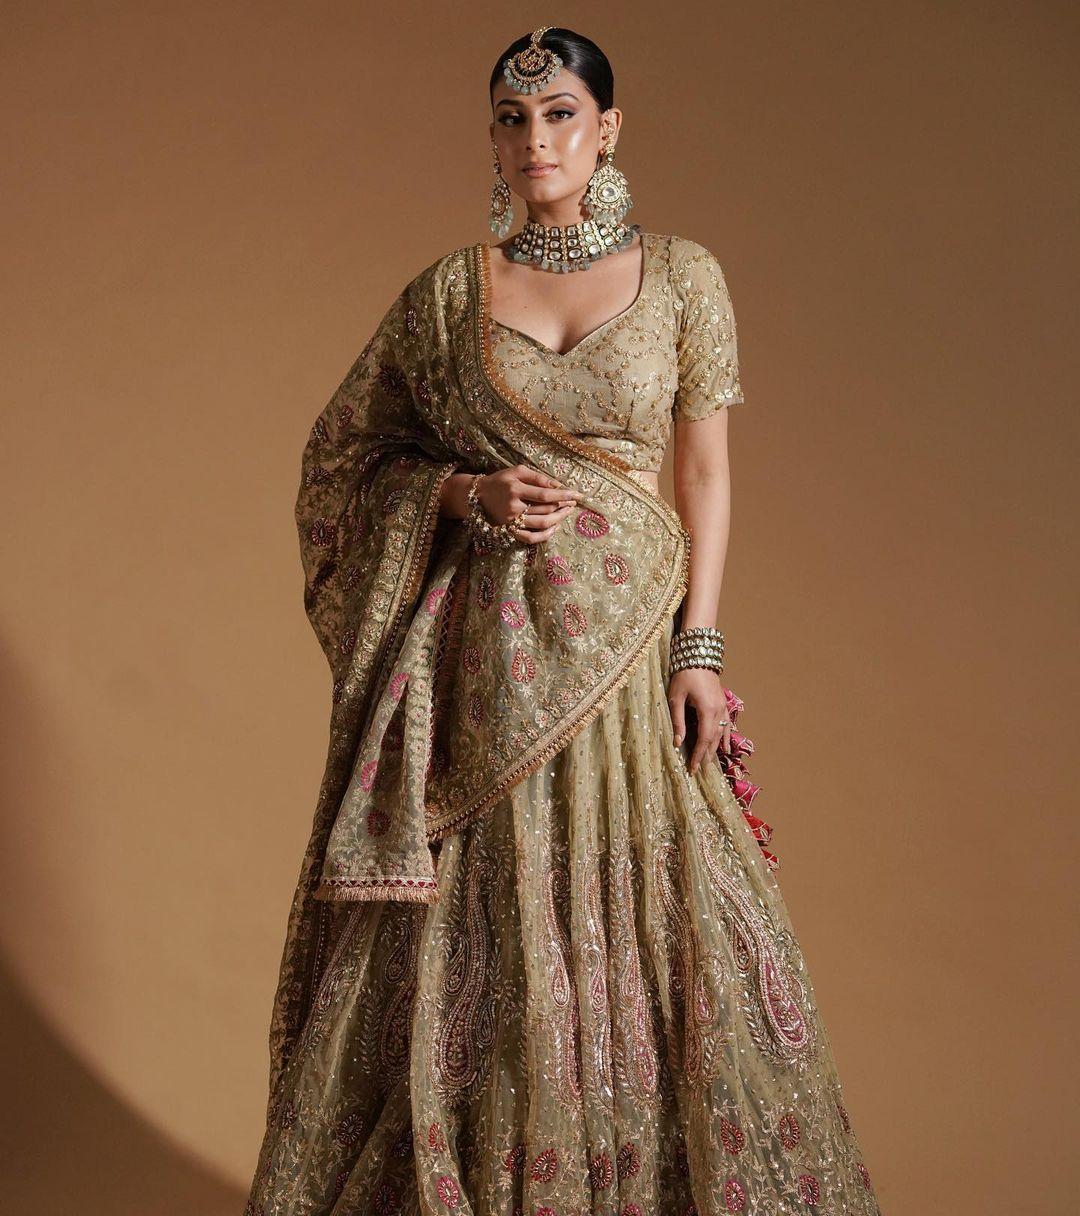 Looking for a heavy outfit to nail your look at your brother's wedding reception? How about wearing Isha's stunning beige lehenga?